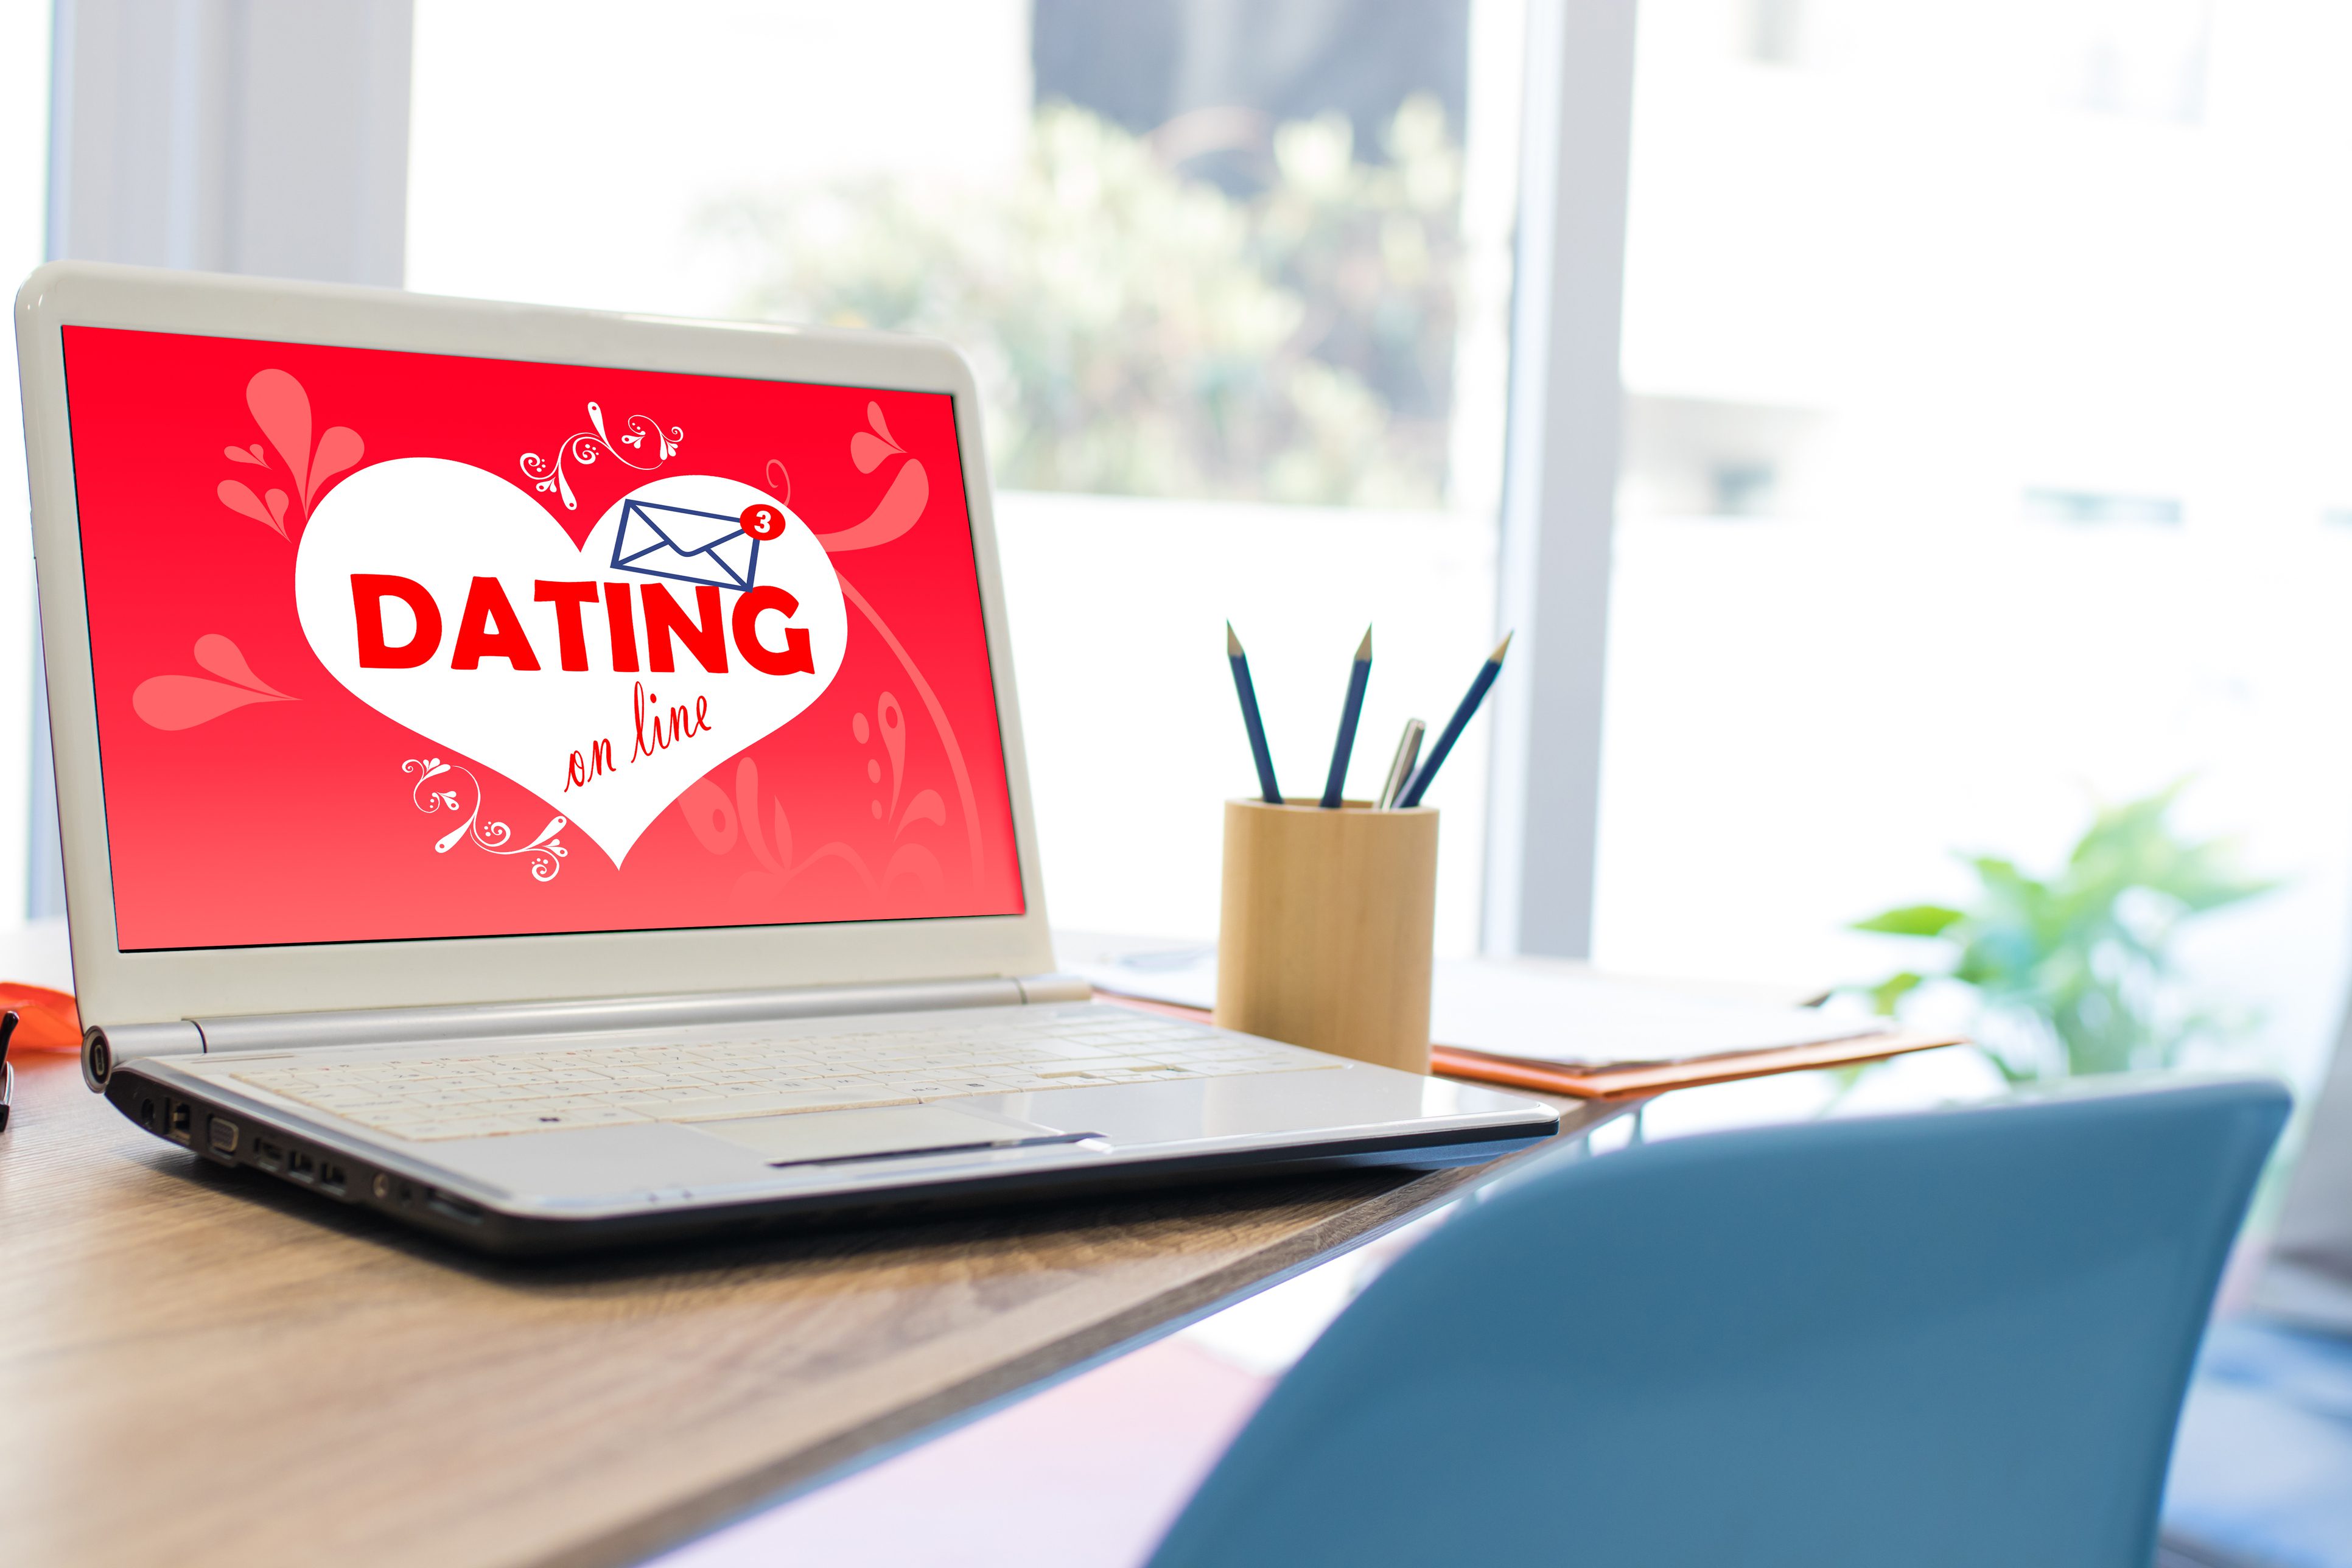 If Someone Does Online Dating To Find A Date, Does That Mean Something Is Wrong With Them?